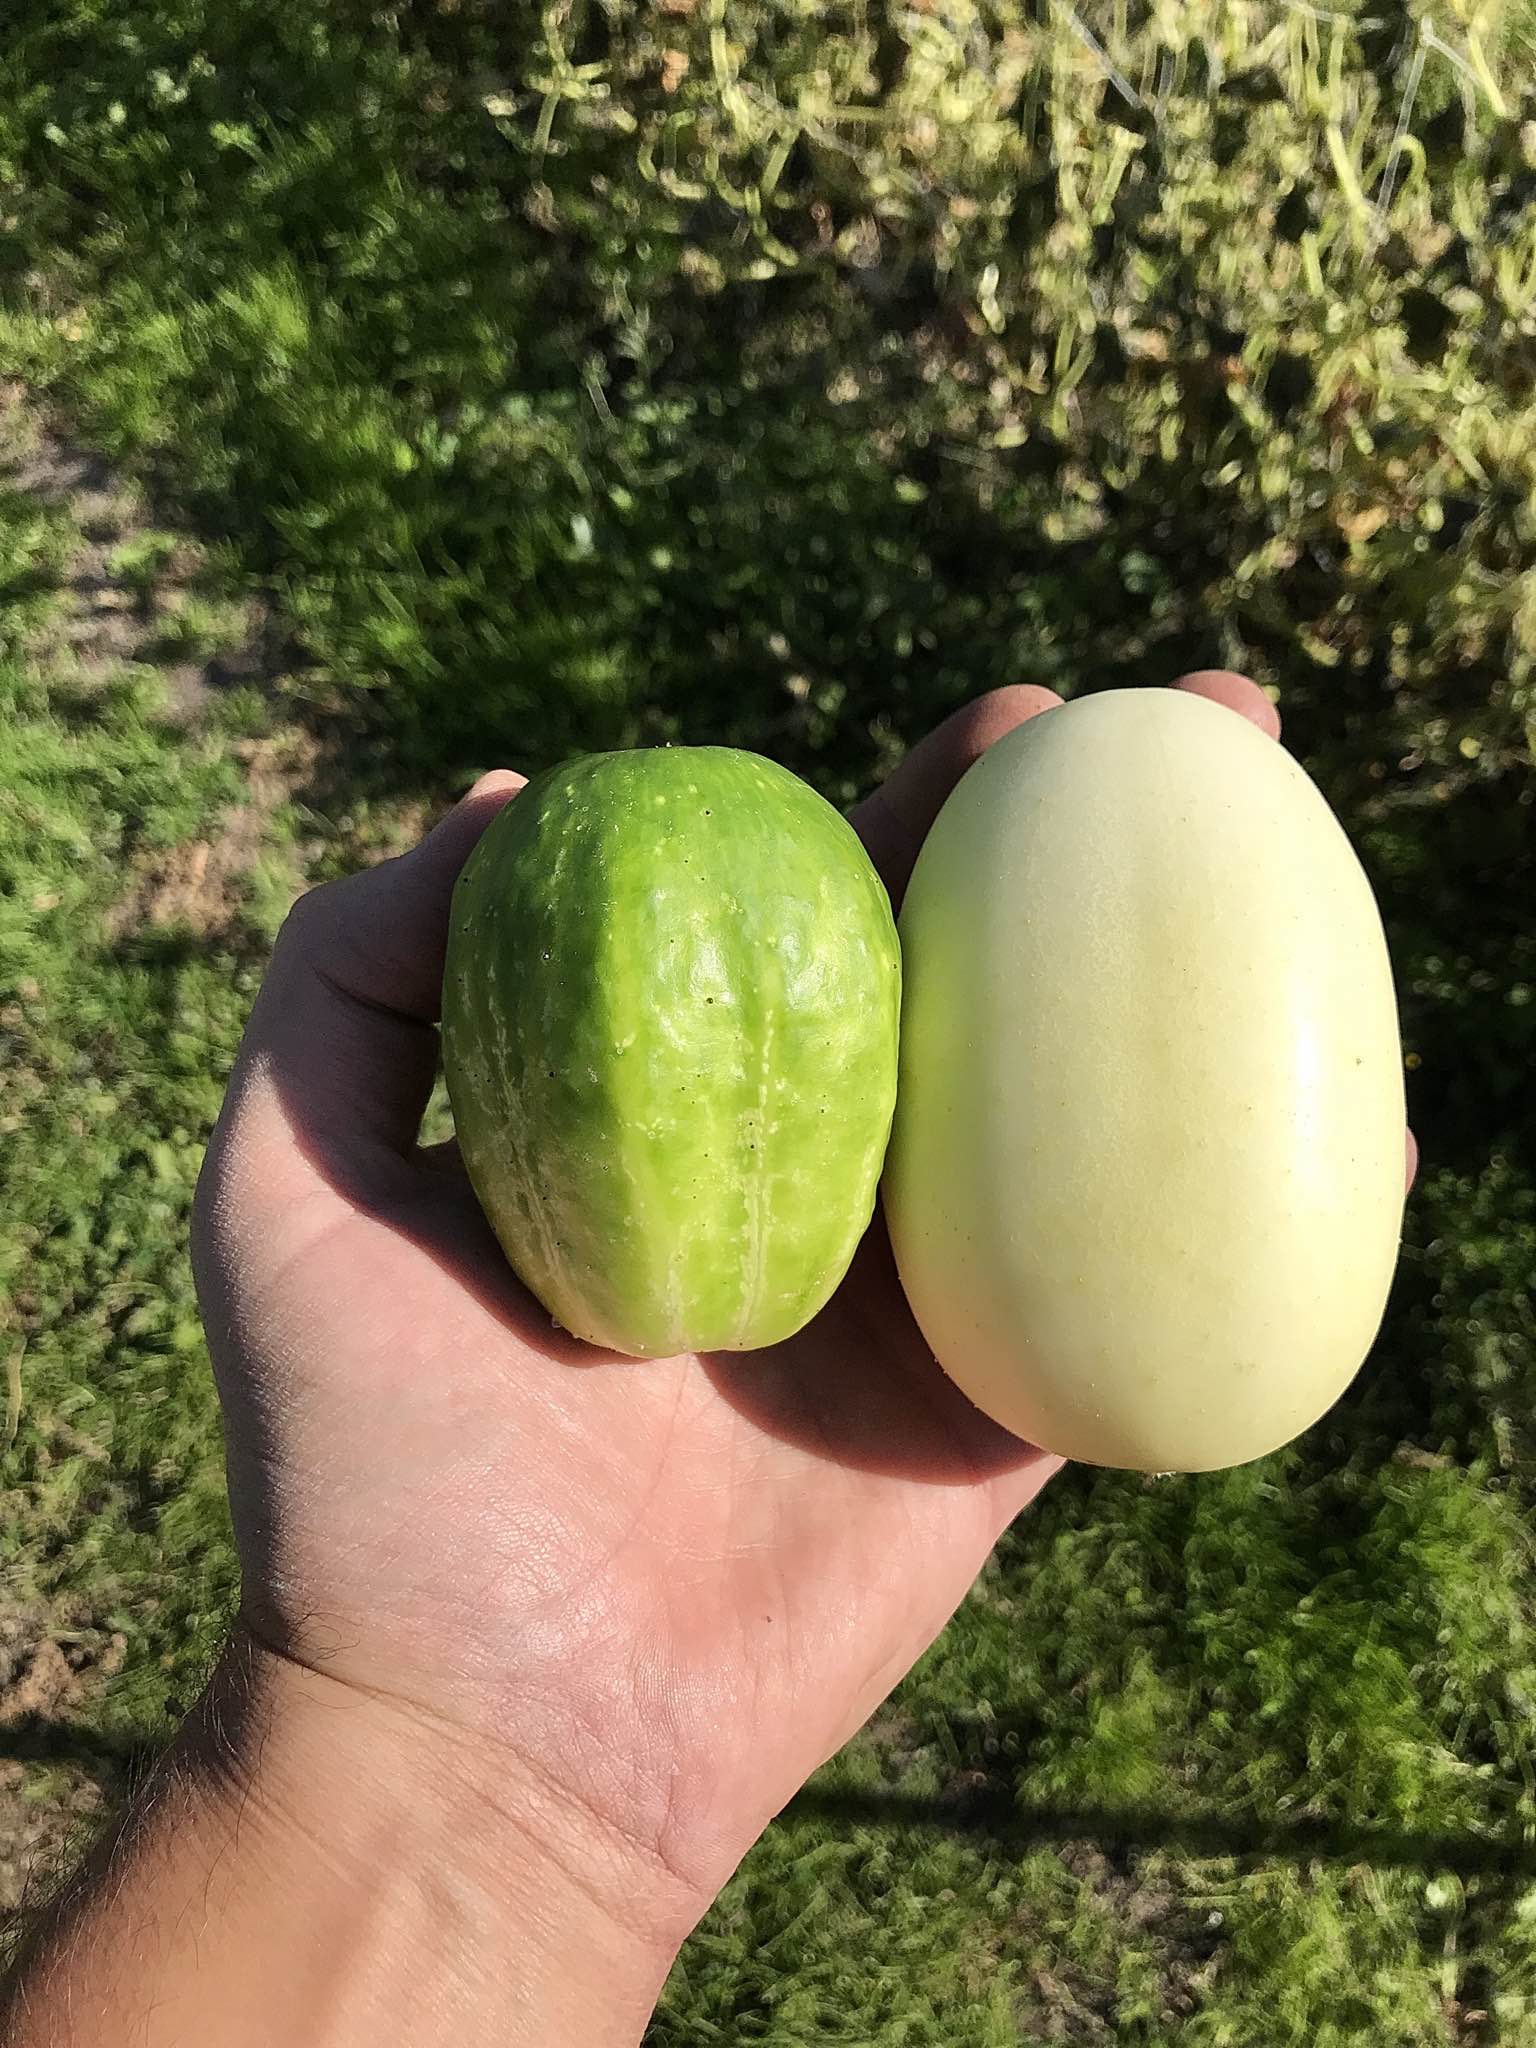 Single hand holding two apple cucumbers, one white and the other green.